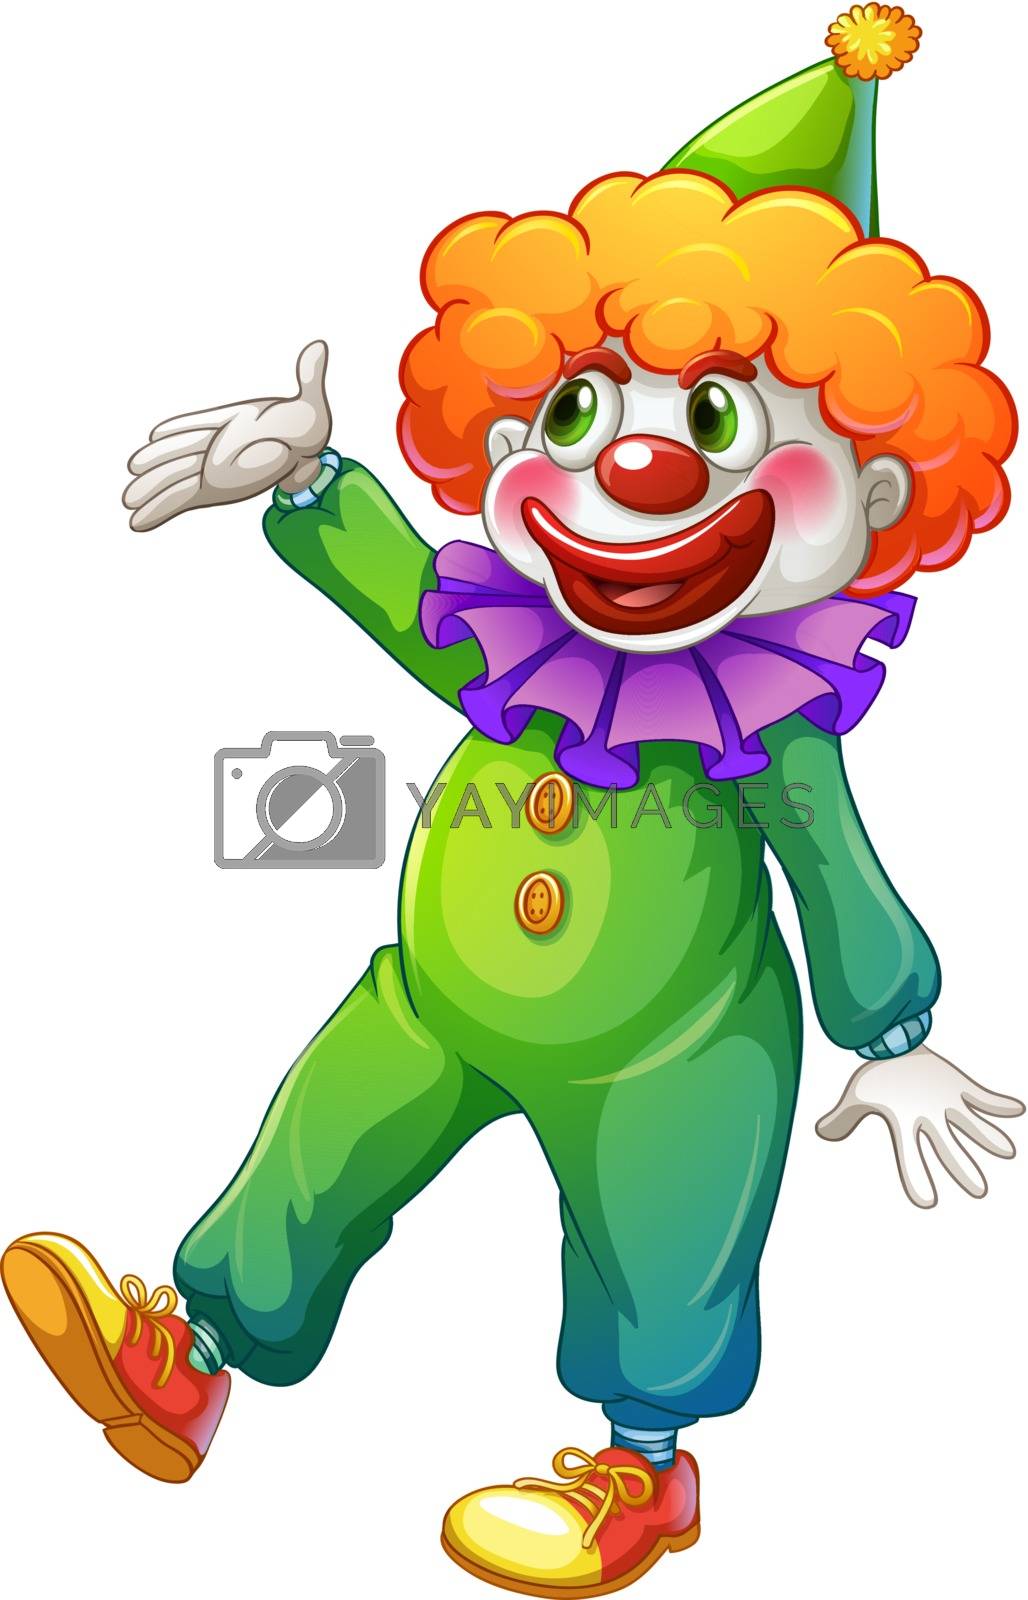 Royalty free image of A clown wearing a green costume by iimages